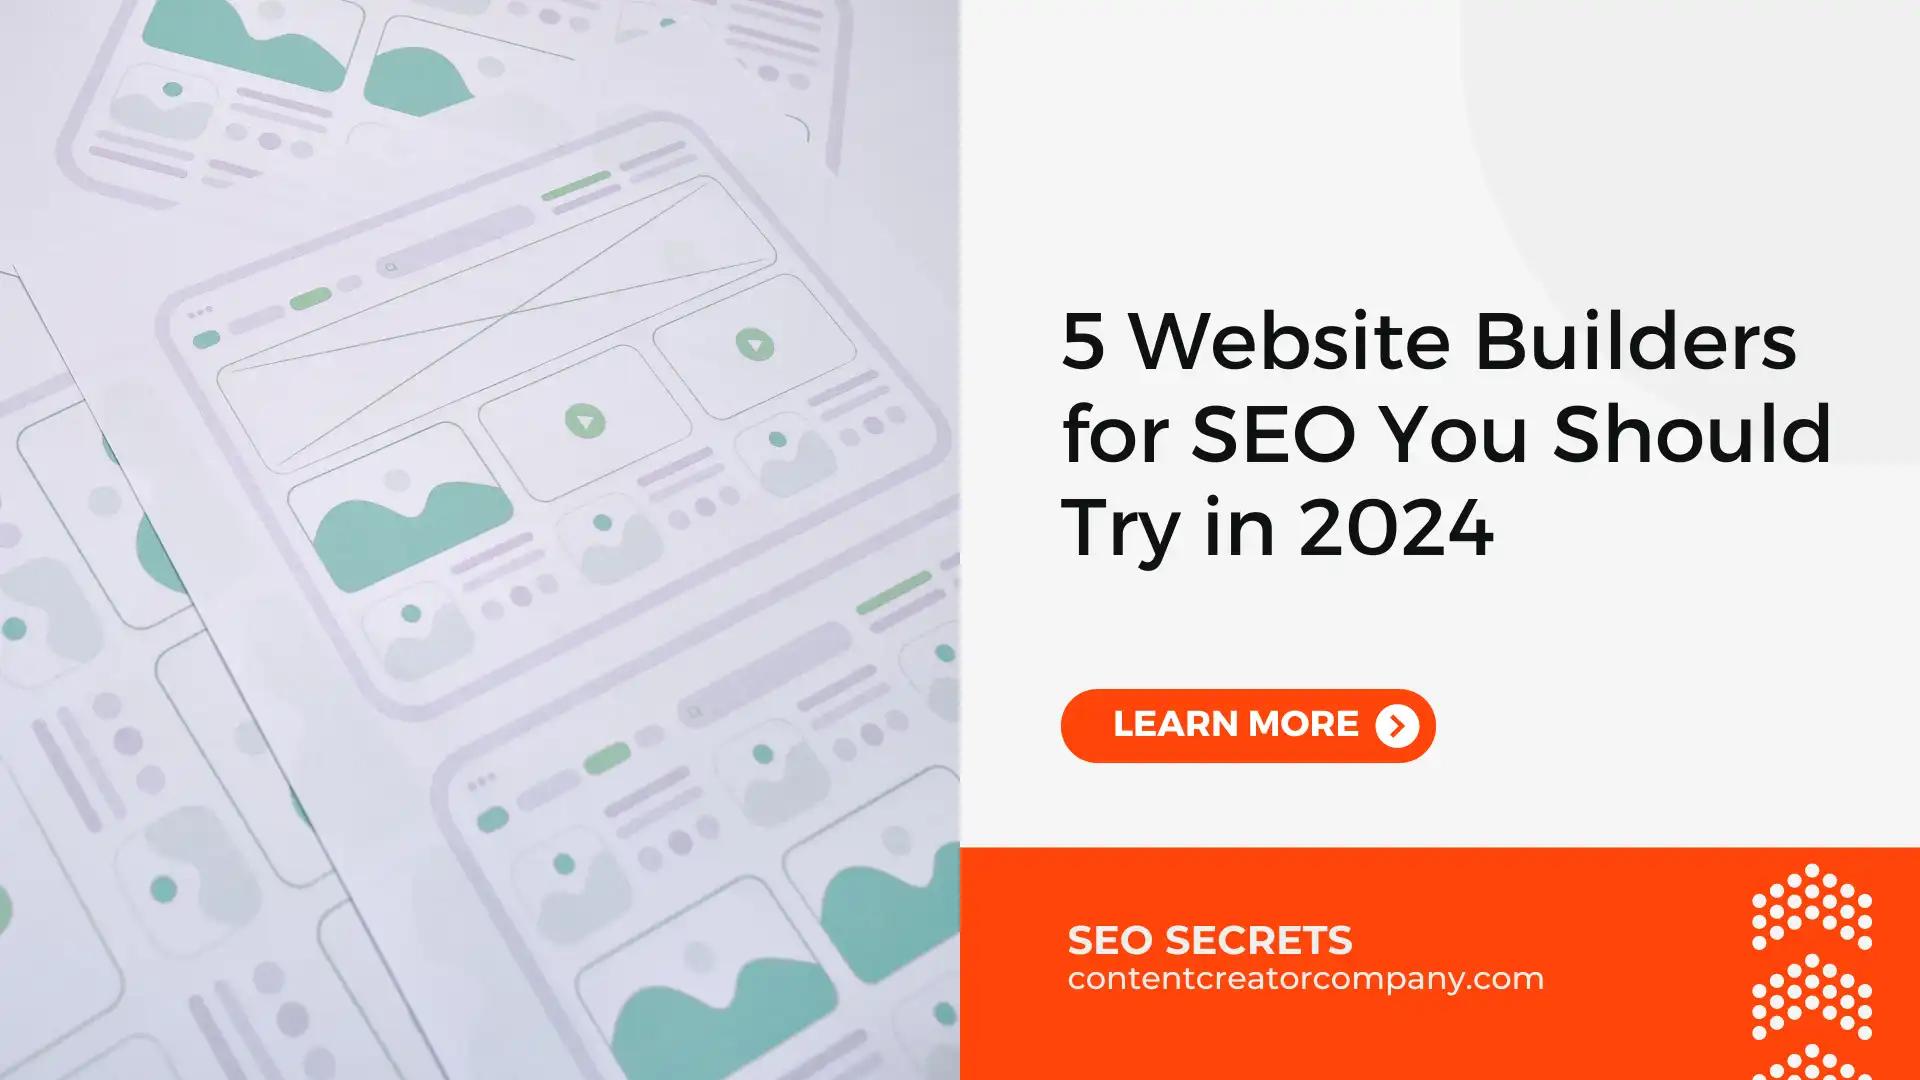 5 Website Builders for SEO You Should Try in 2024